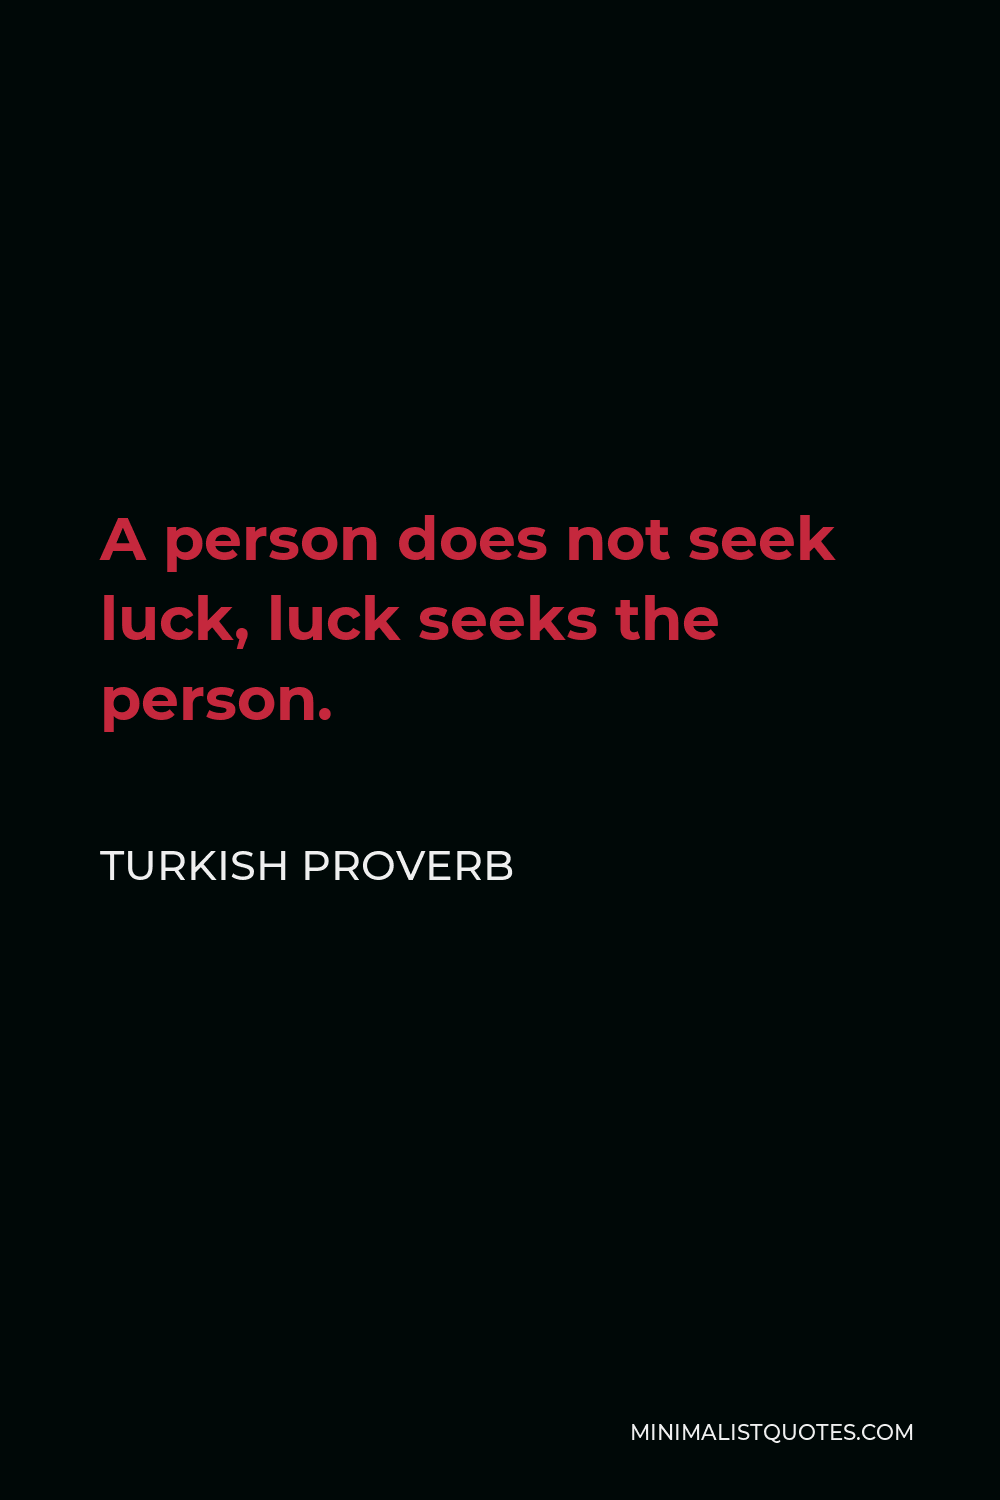 Turkish Proverb Quote - A person does not seek luck; luck seeks the person